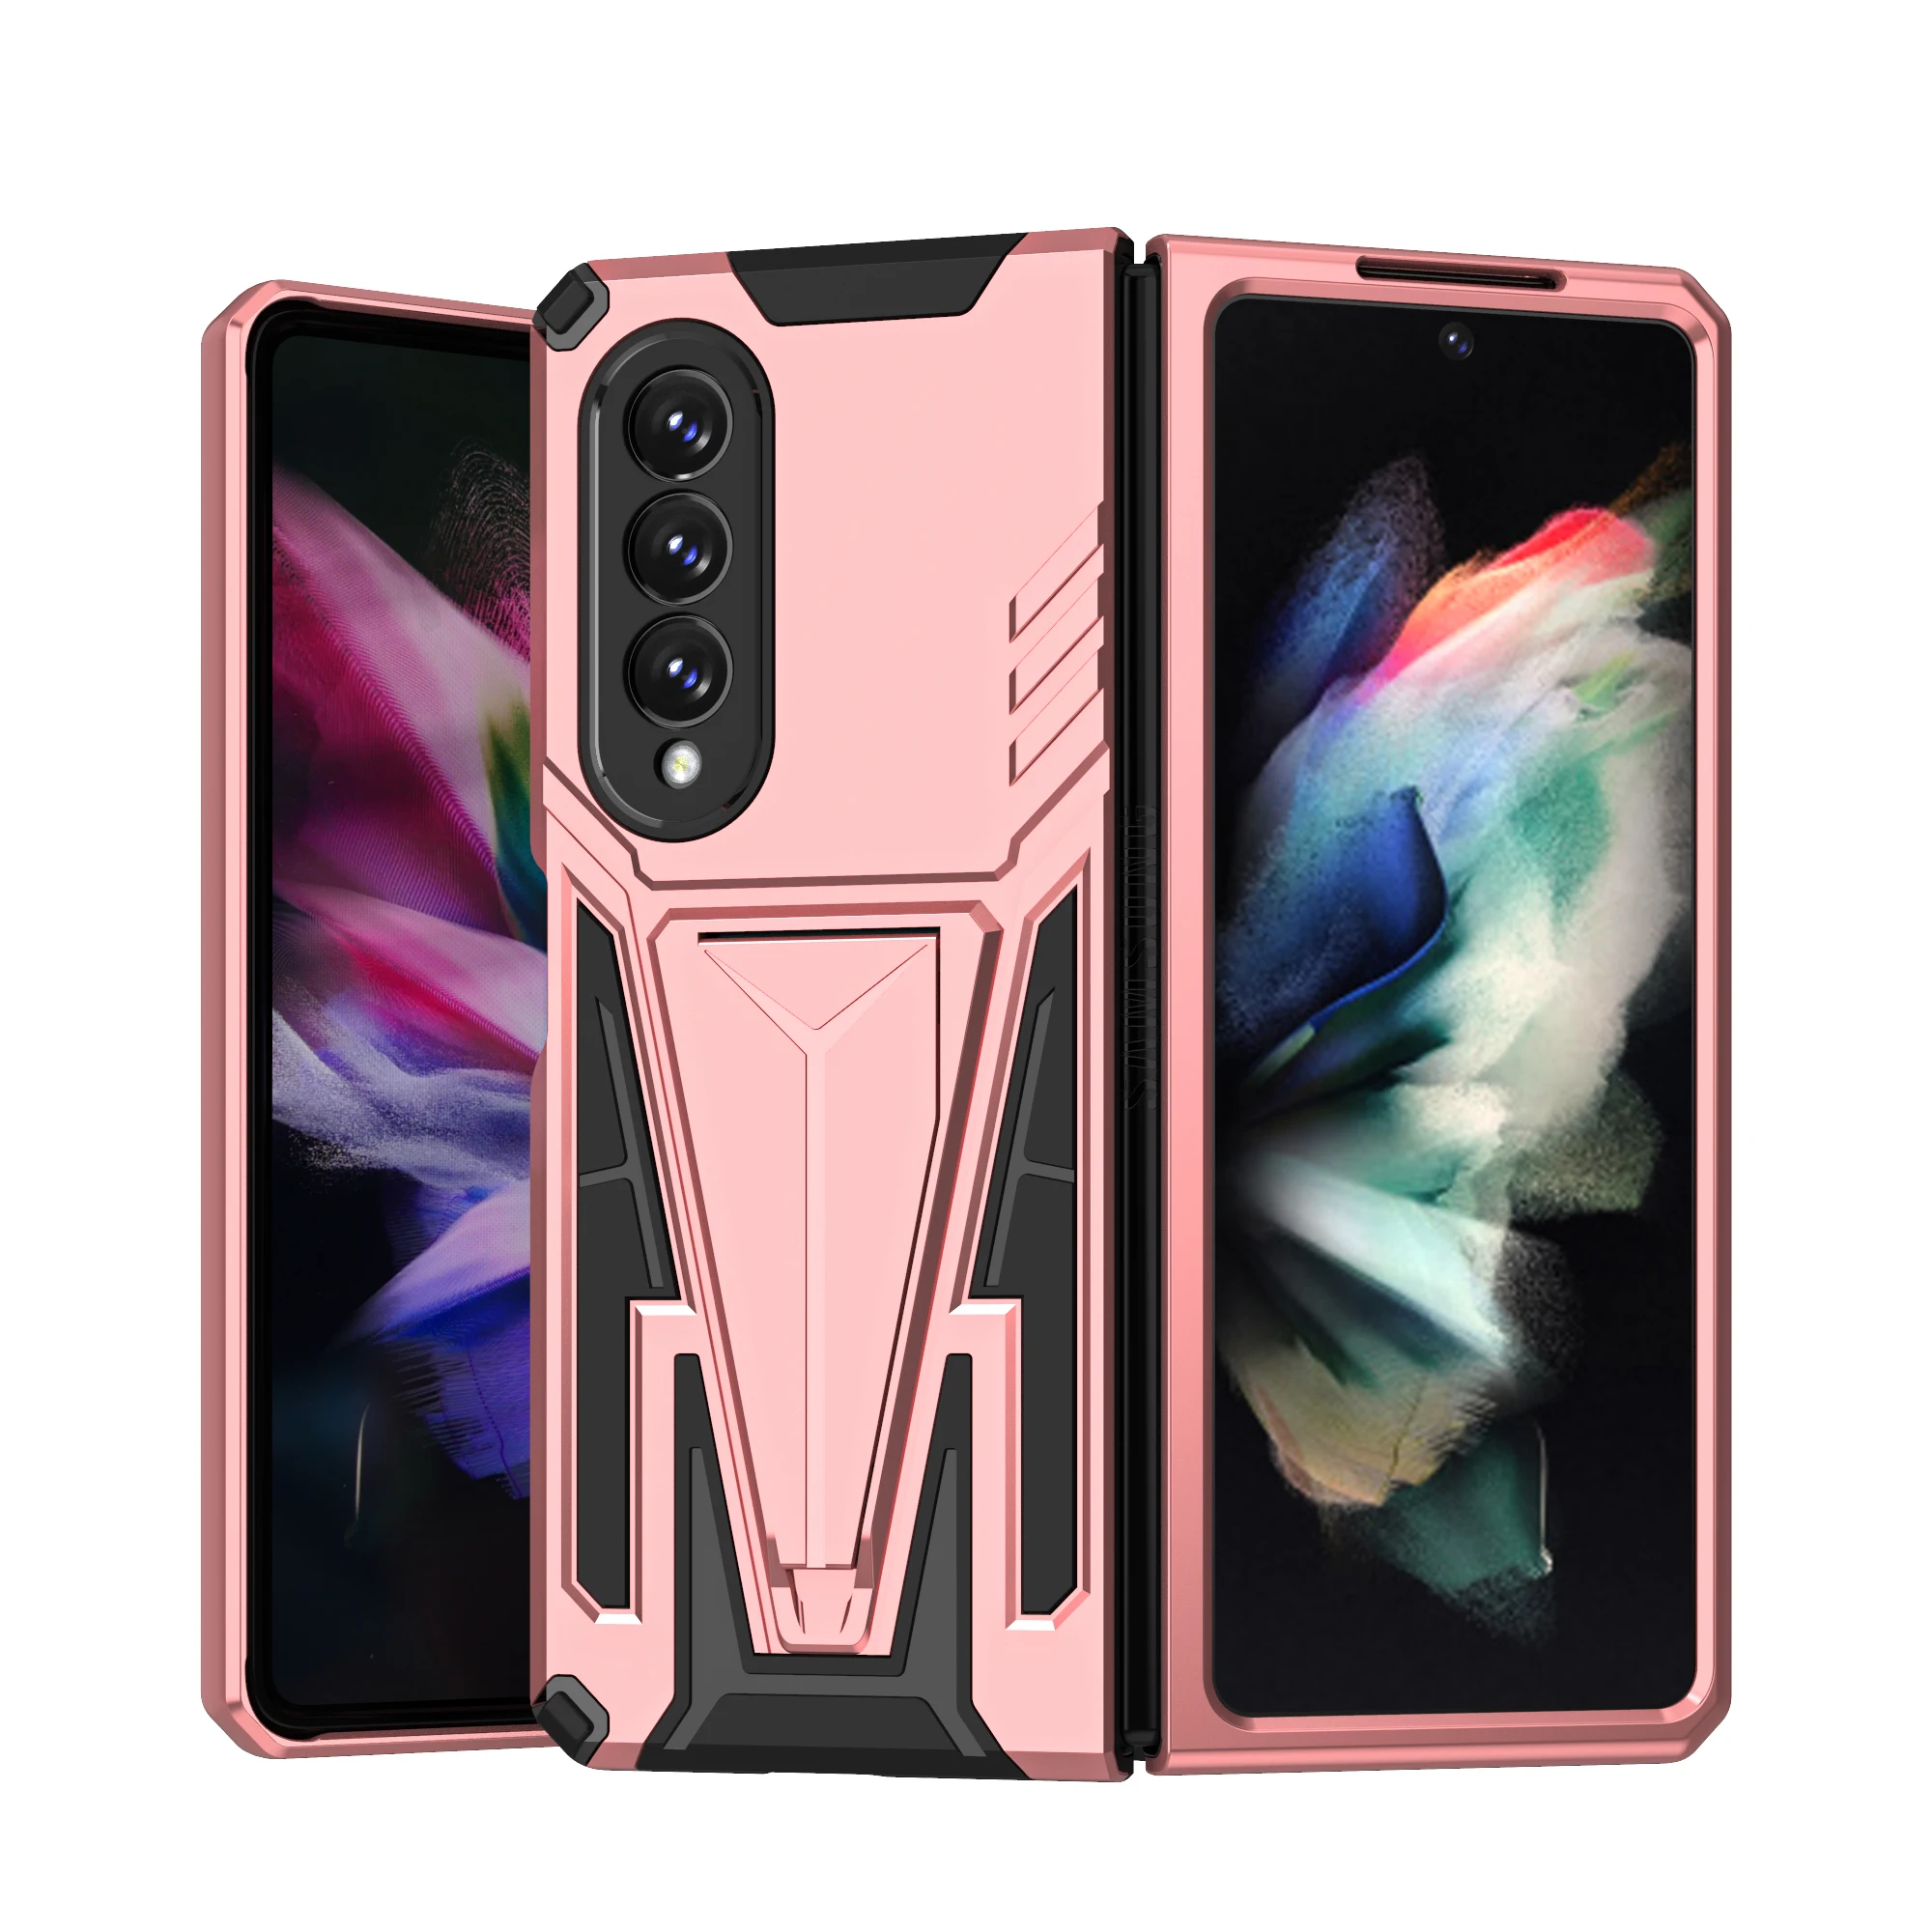 kawaii phone cases samsung Shockproof Magnetic Armor Case for Samsung Galaxy Z Fold3 5G Fold 3 Anti-Slip Cell Phone Cover Fundas cute samsung phone case Cases For Samsung